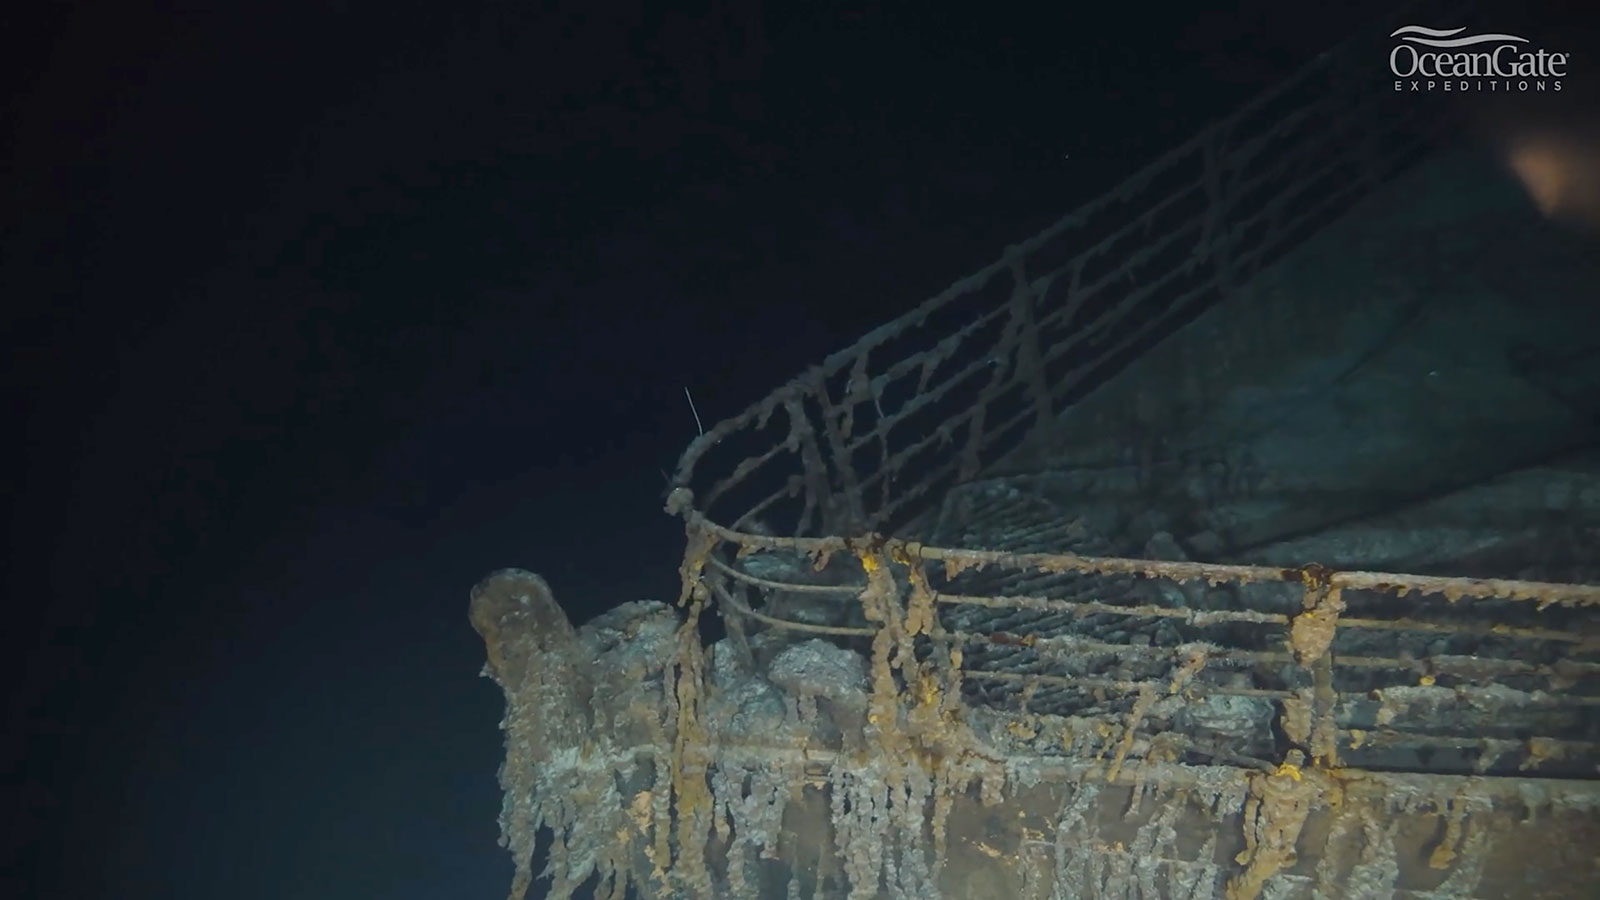 A still taken from video of the Titanic wreckage released by OceanGate Expeditions in 2022.